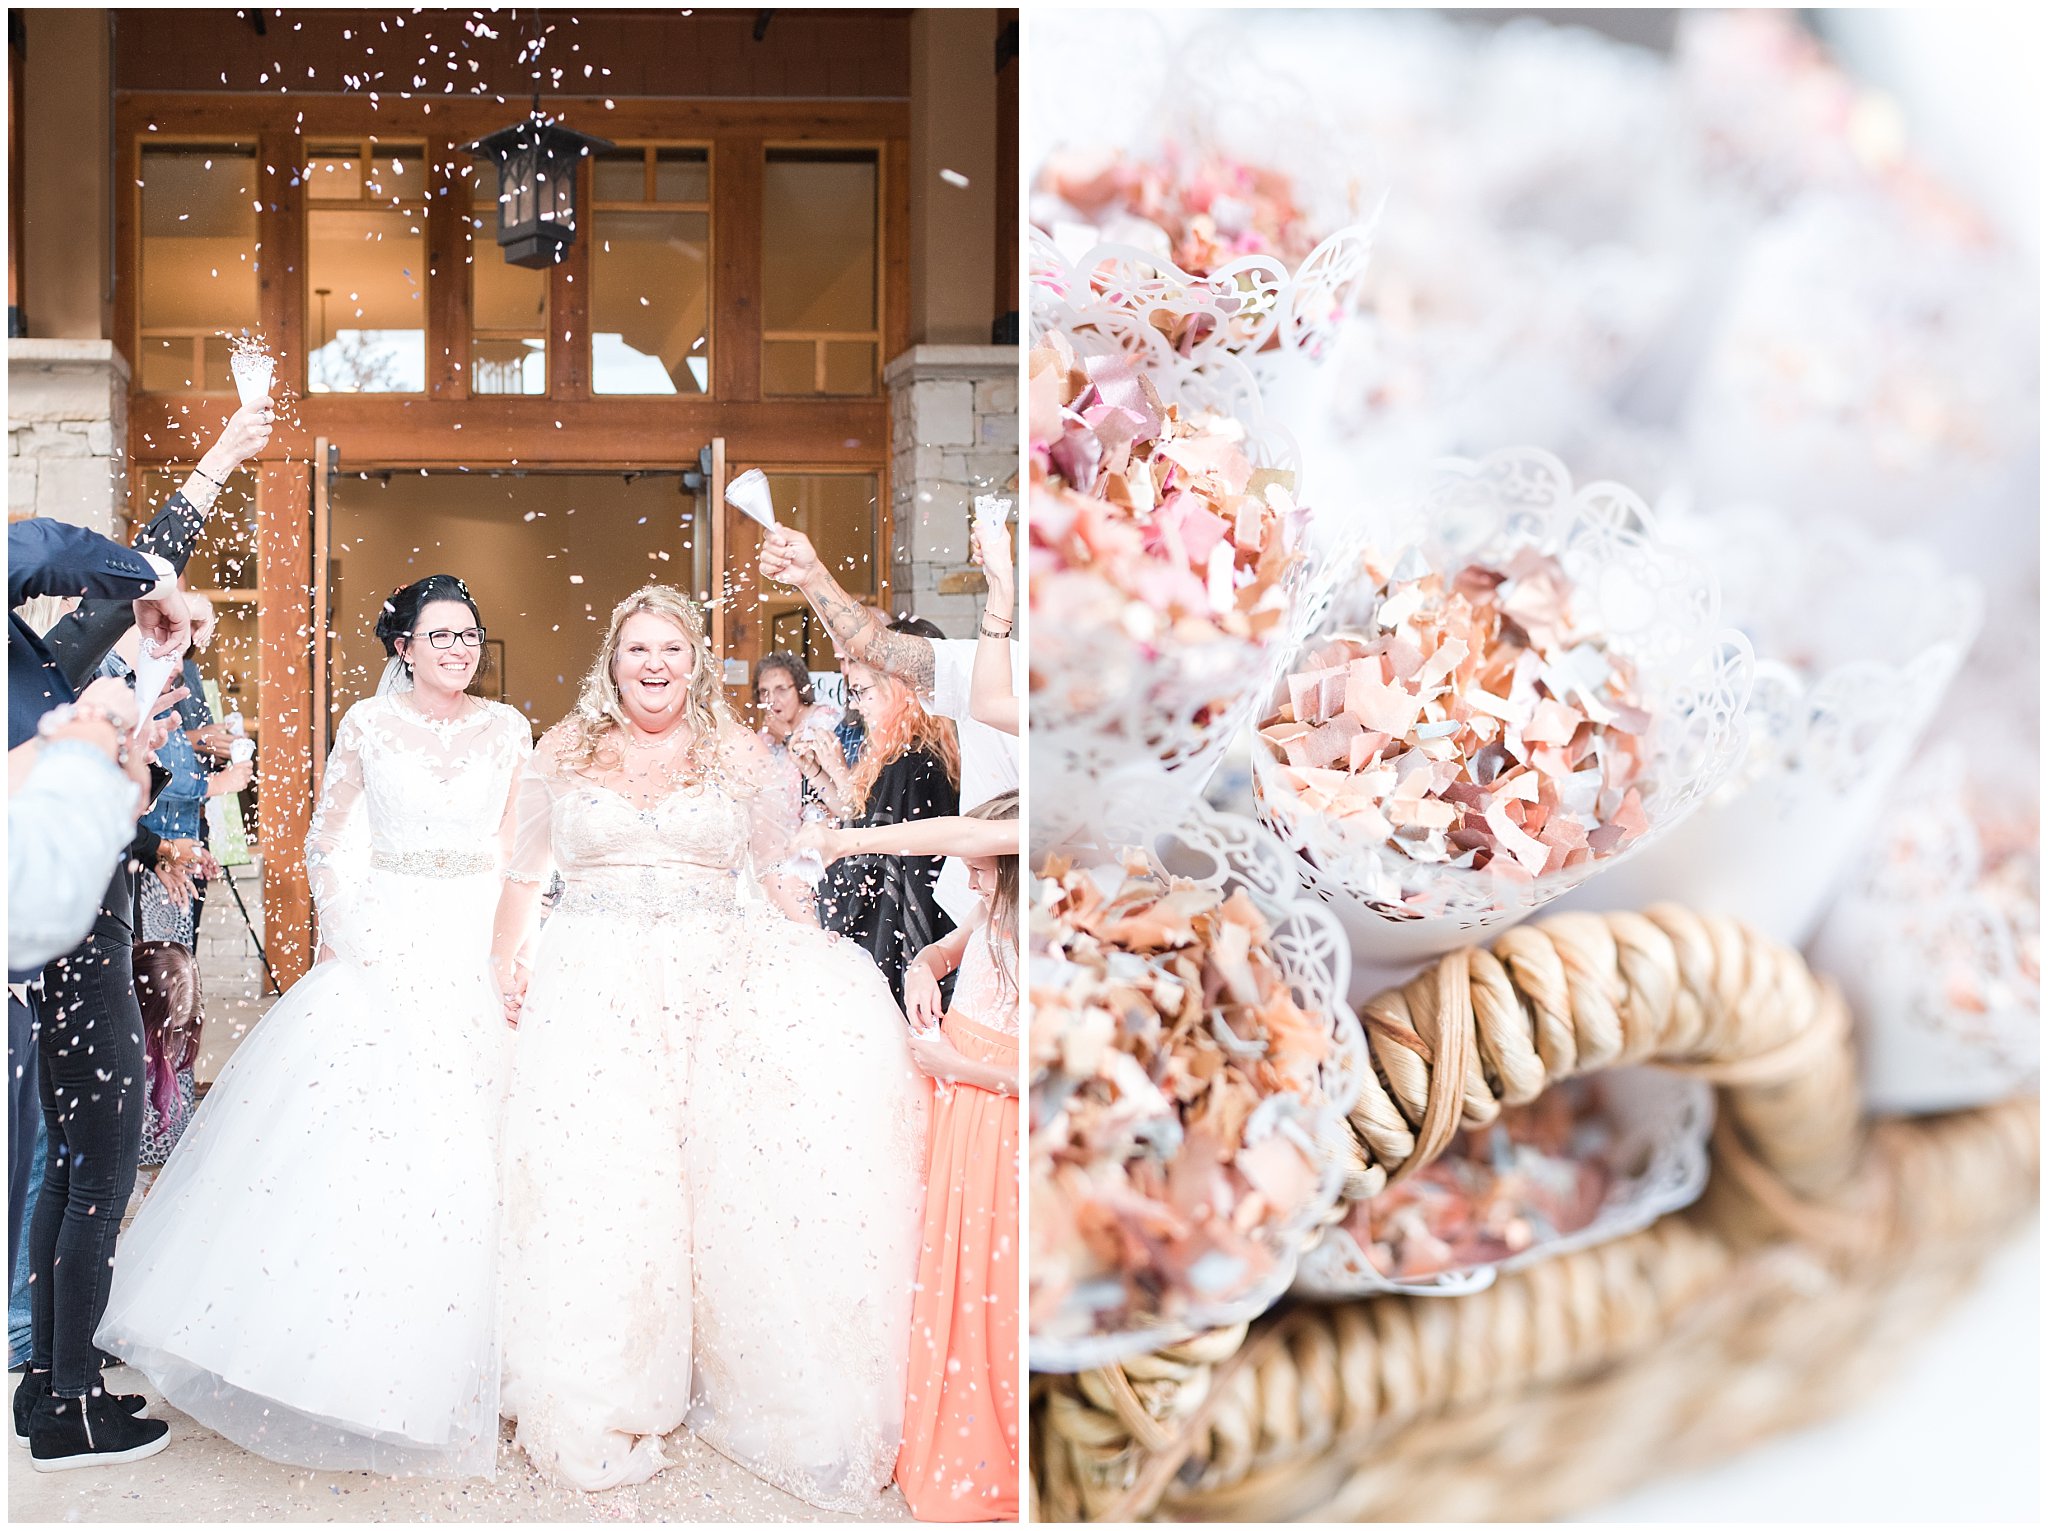 Biodegradable confetti wedding exit | Park City Wedding at the Hyatt Centric | Jessie and Dallin Photography